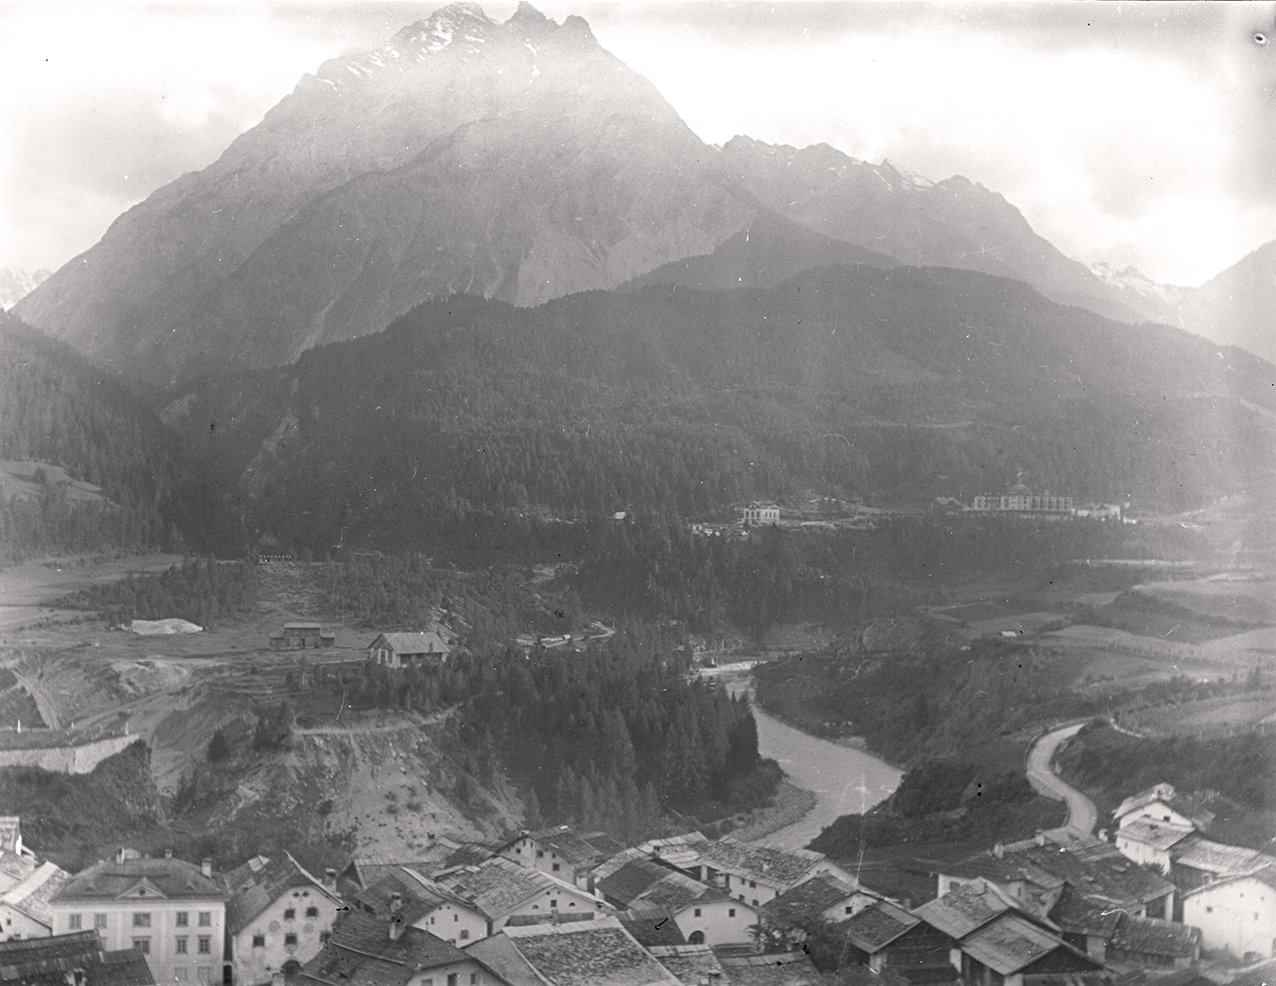 Aussicht vom Fenster des Hotels Belvédère in Scuol (14.09.1897), 86429_o (DRM CC BY-NC-SA)